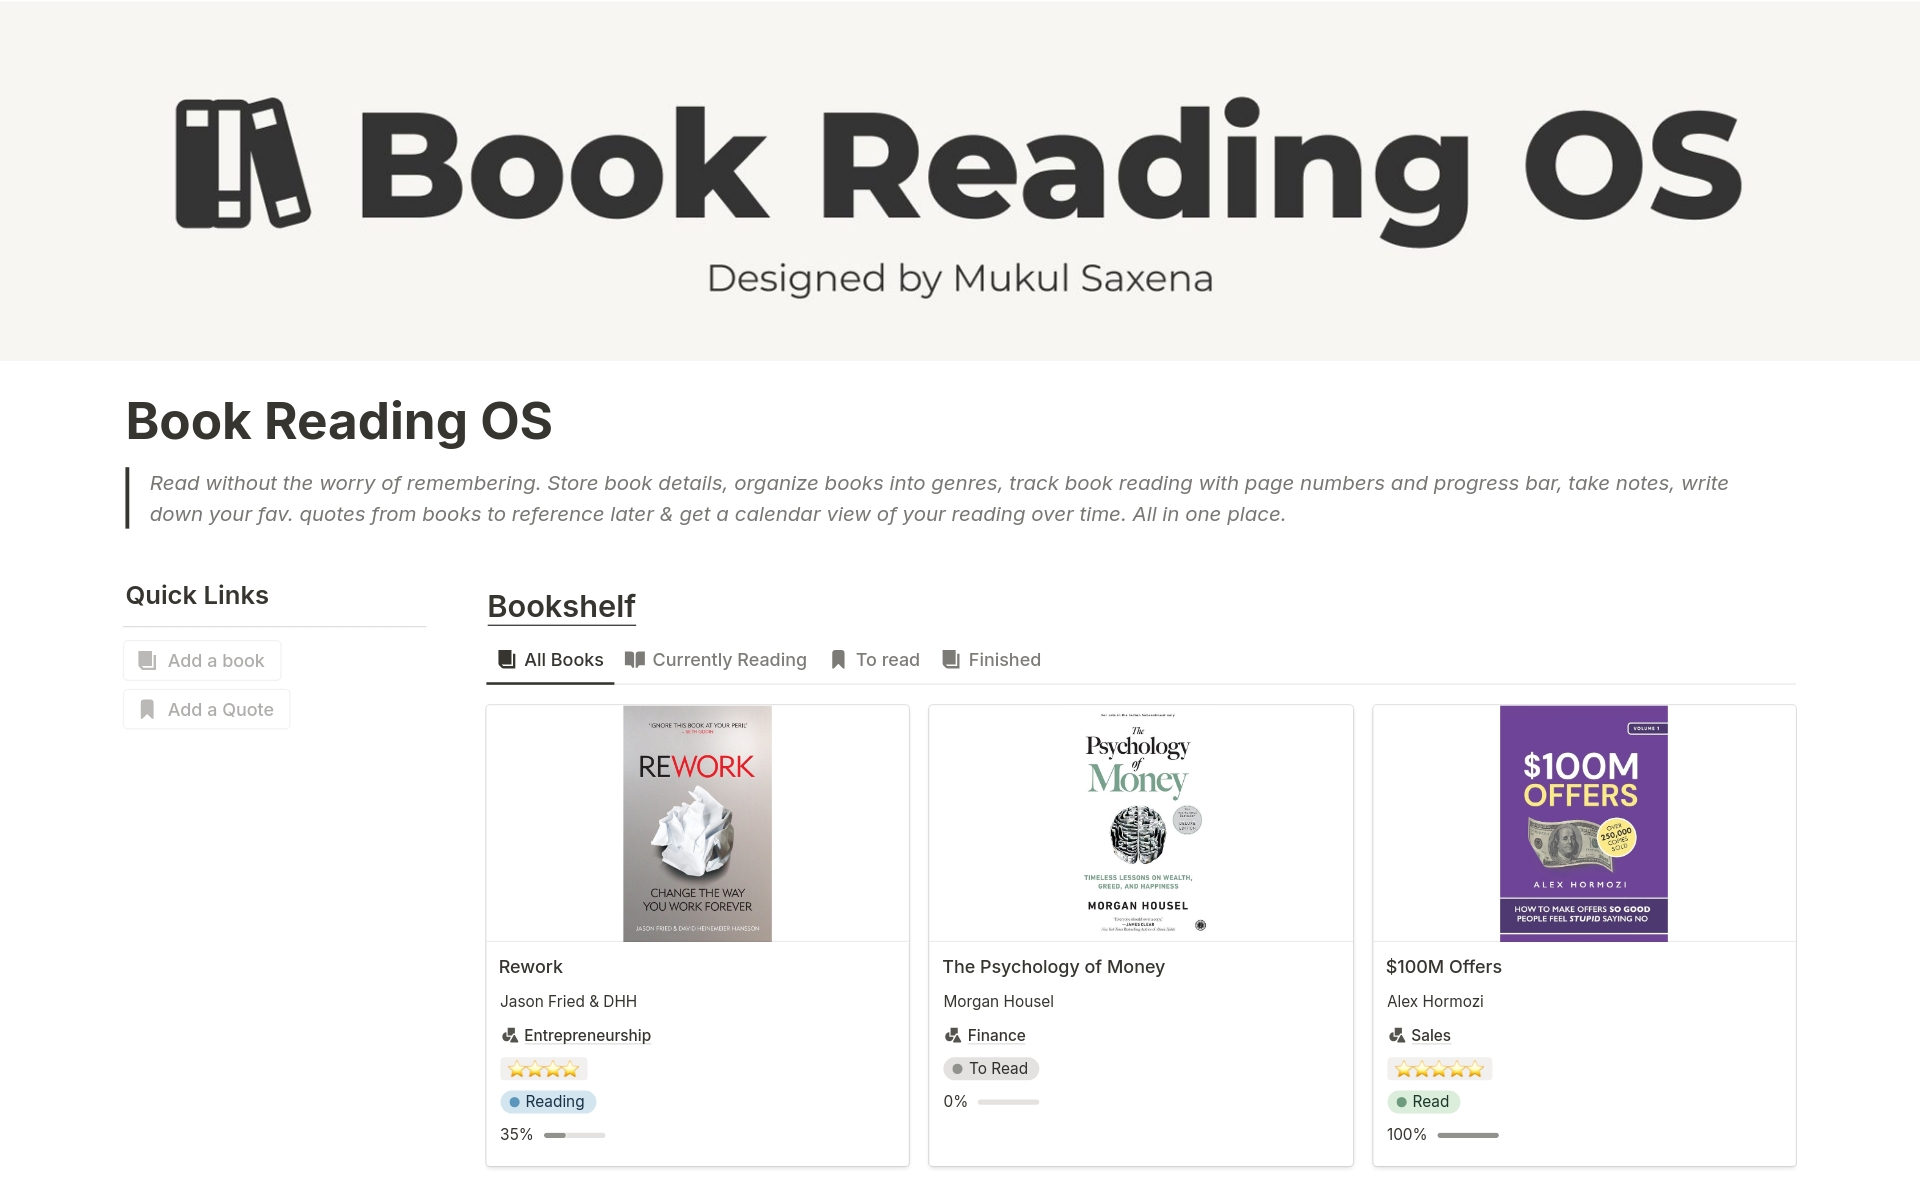 This Book Reading Tracker OS helps you keep a track of your reading progress, rate, organize, manage books with ease, saving you 3x time & energy.